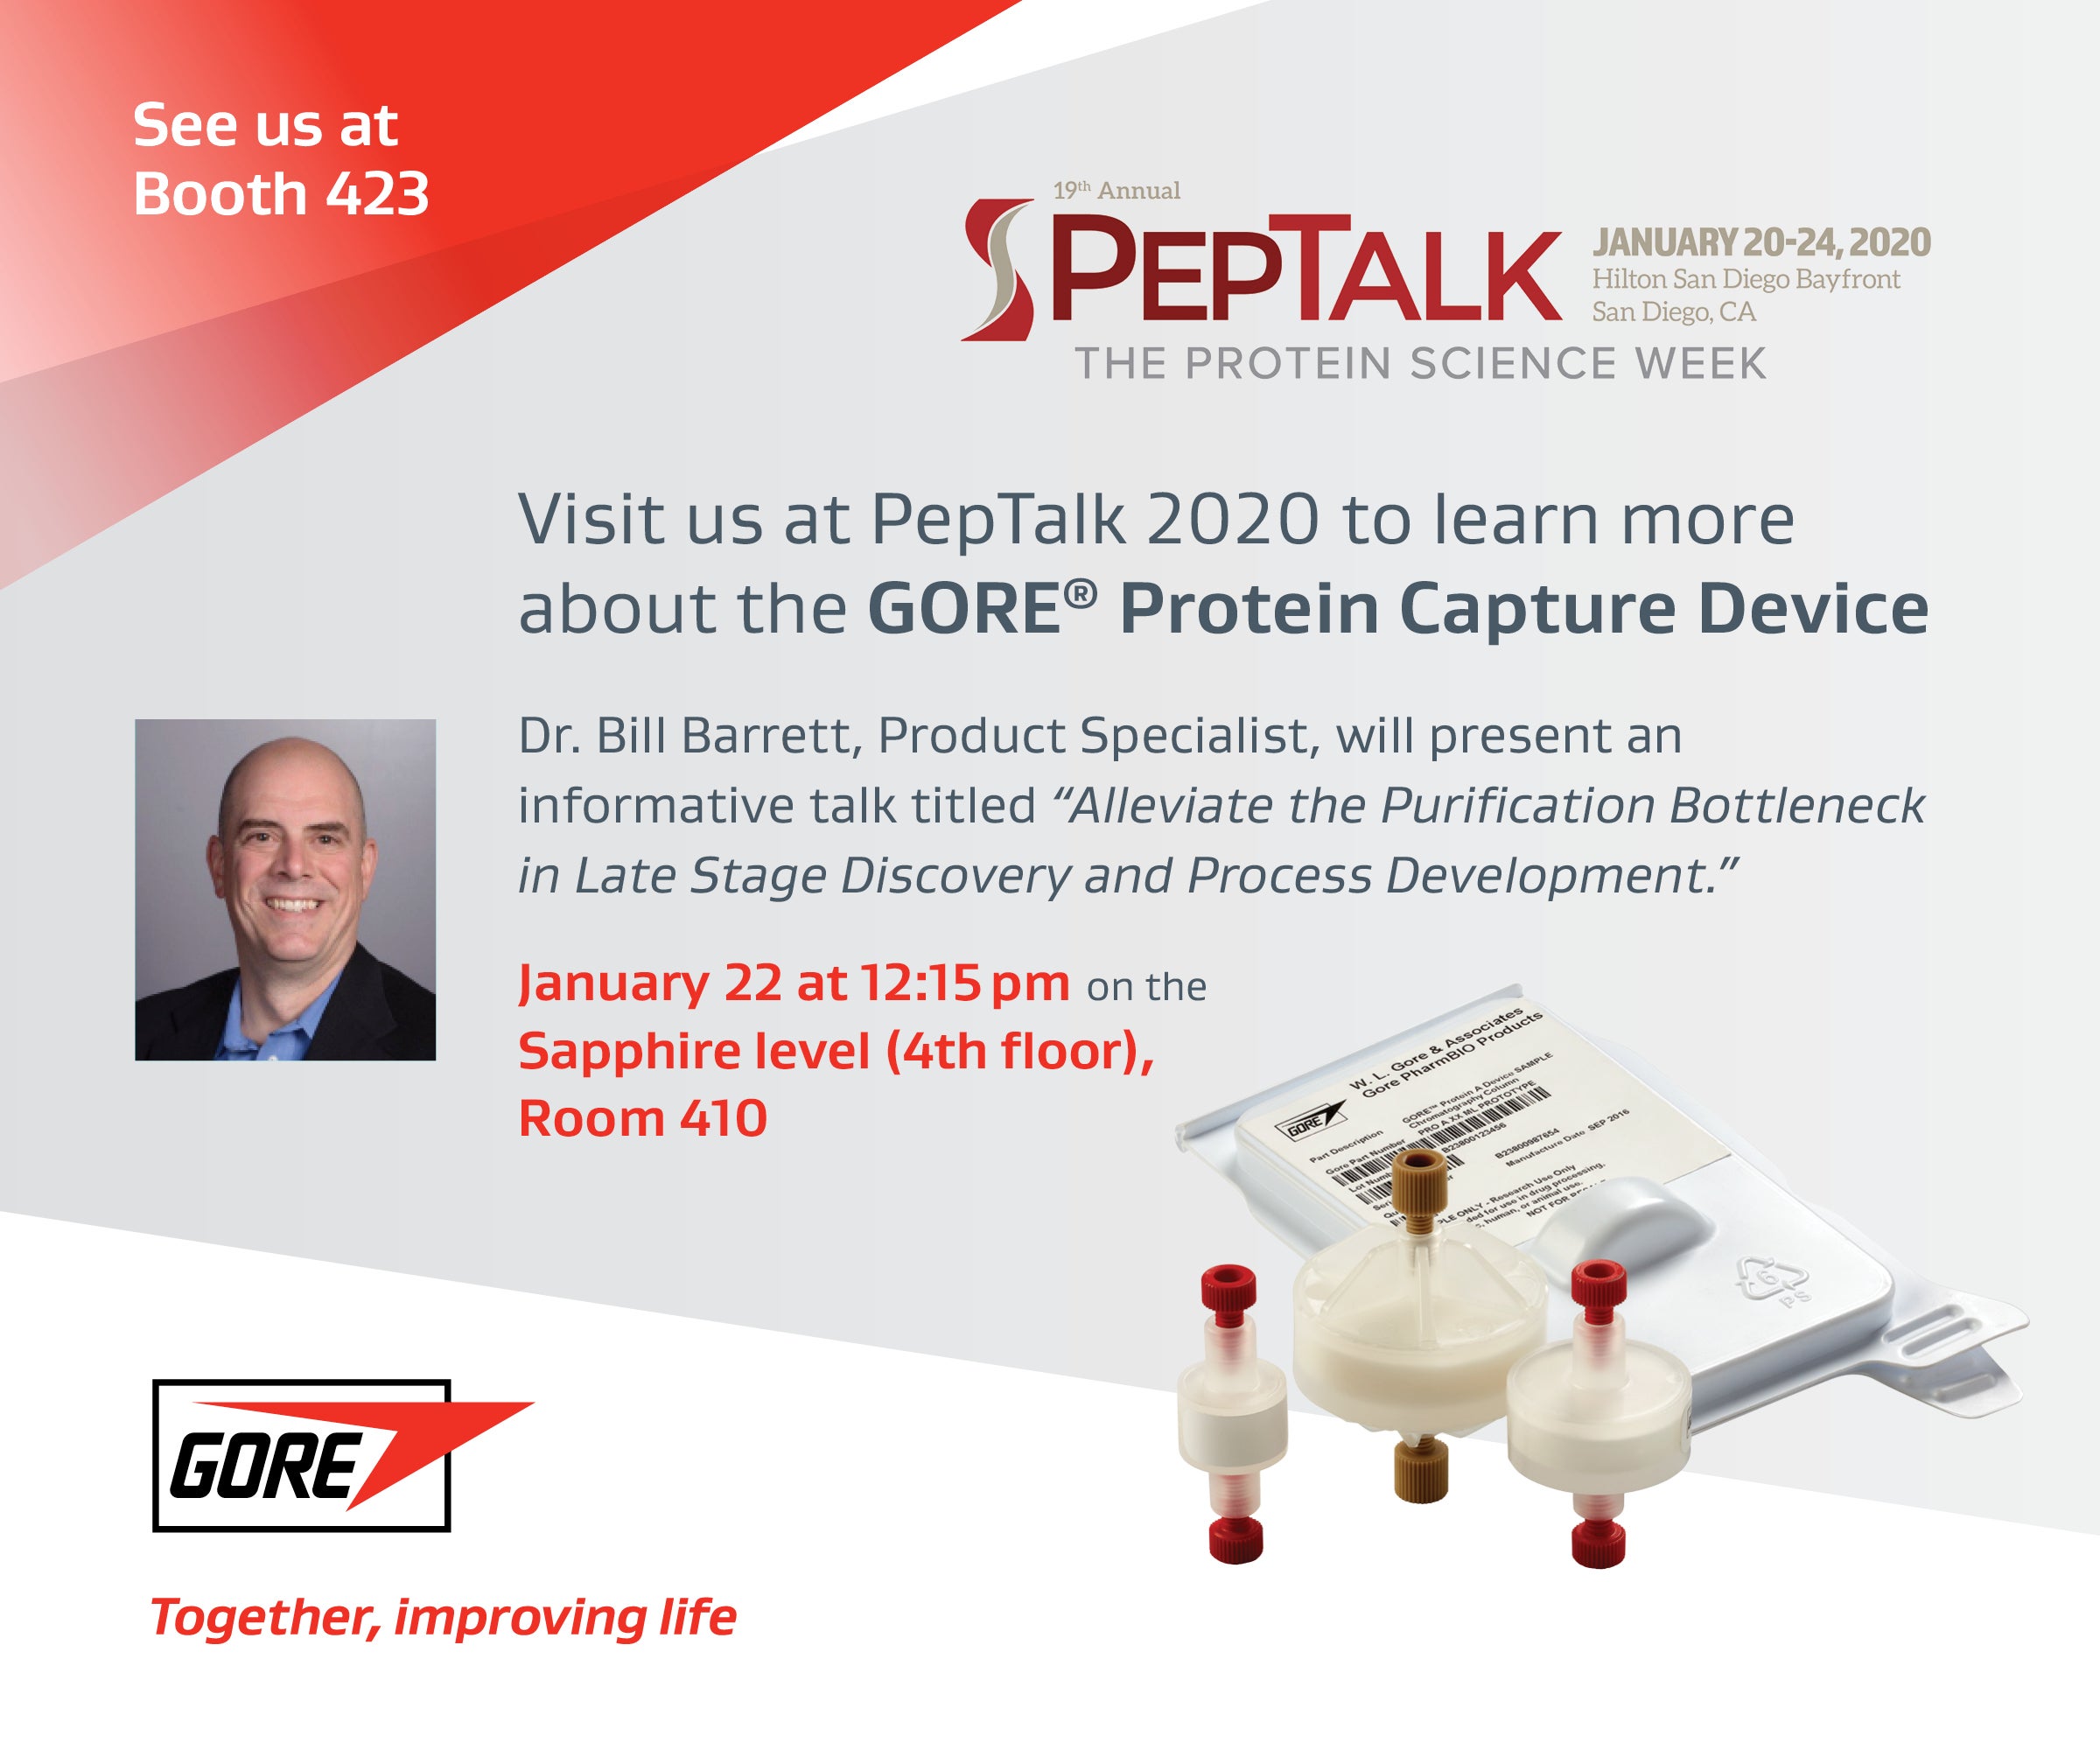 Gore at PepTalk 2020 - Learn more about the GORE Protein Capture Device